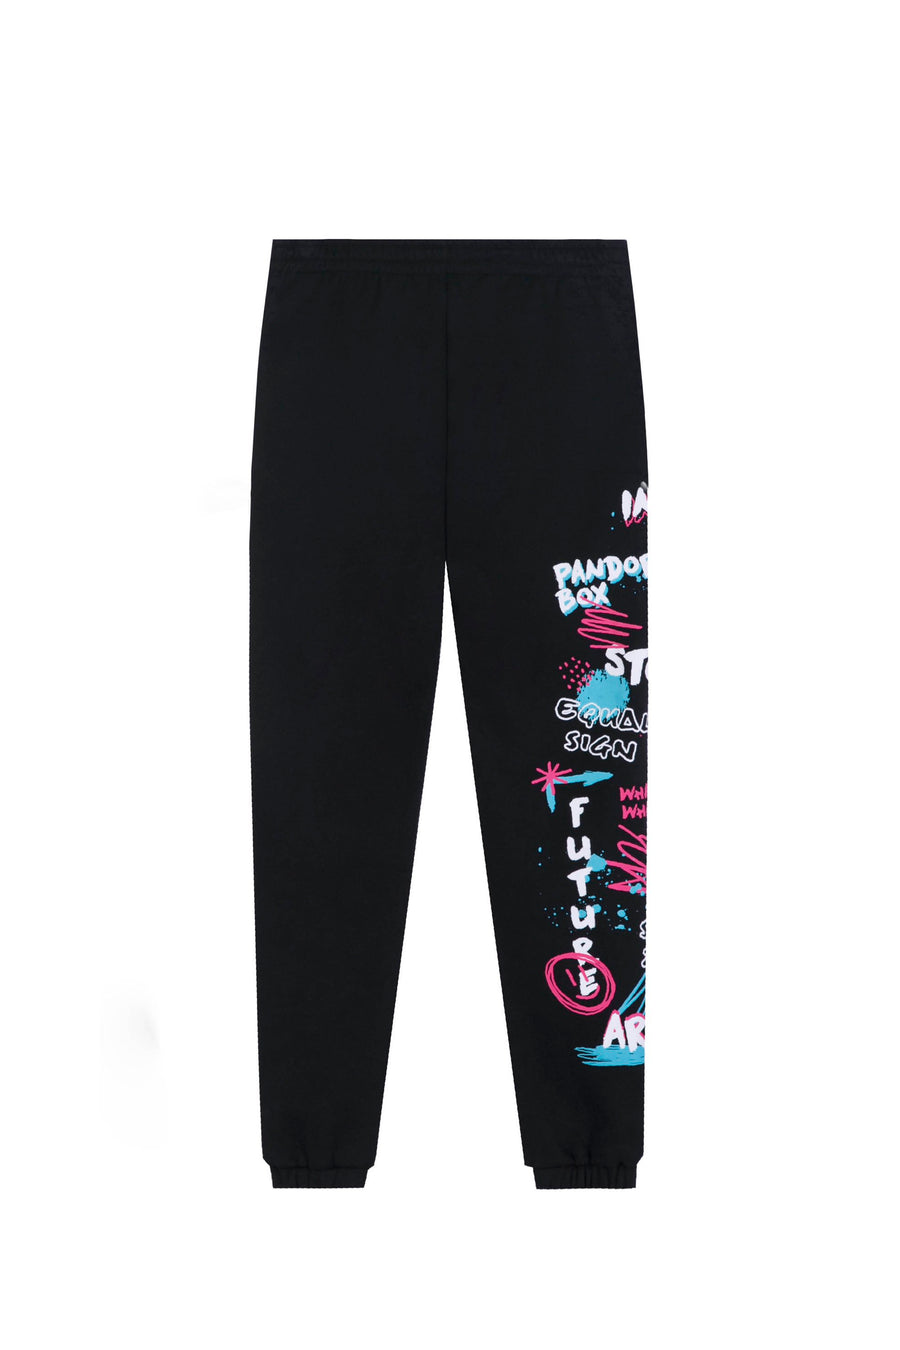 Jack in the Box Sweatpants [PREORDER ENDED]